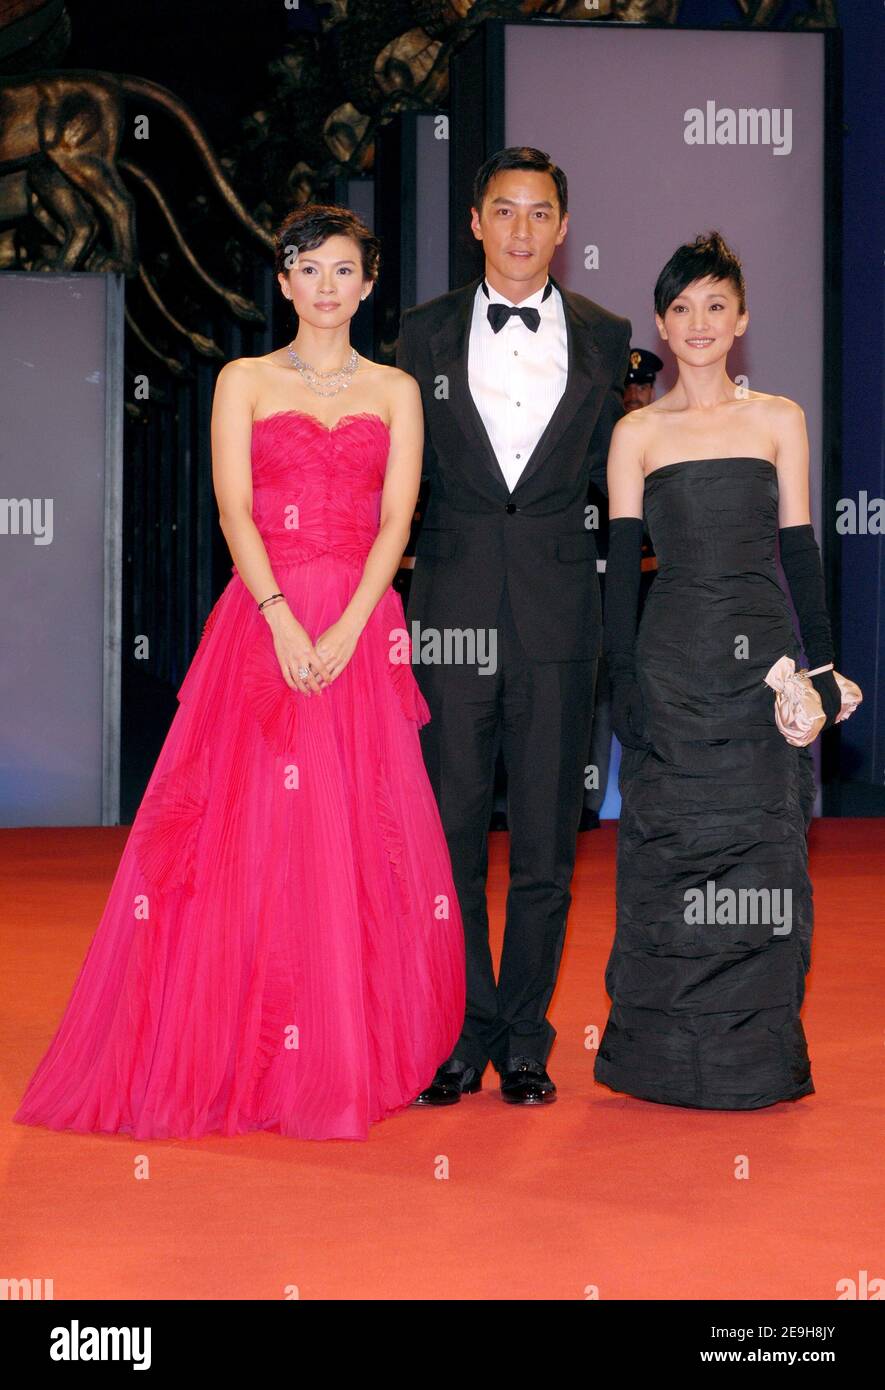 Cast members Zhang Ziyi, Daniel Wu and Zhou Xun pose together as they arrive to the premiere of their new film 'YeYan' at the 63rd annual Venice Film Festival in Venice, Italy, on September 3, 2006. Photo by Nicolas Khayat/ABACAPRESS.COM Stock Photo